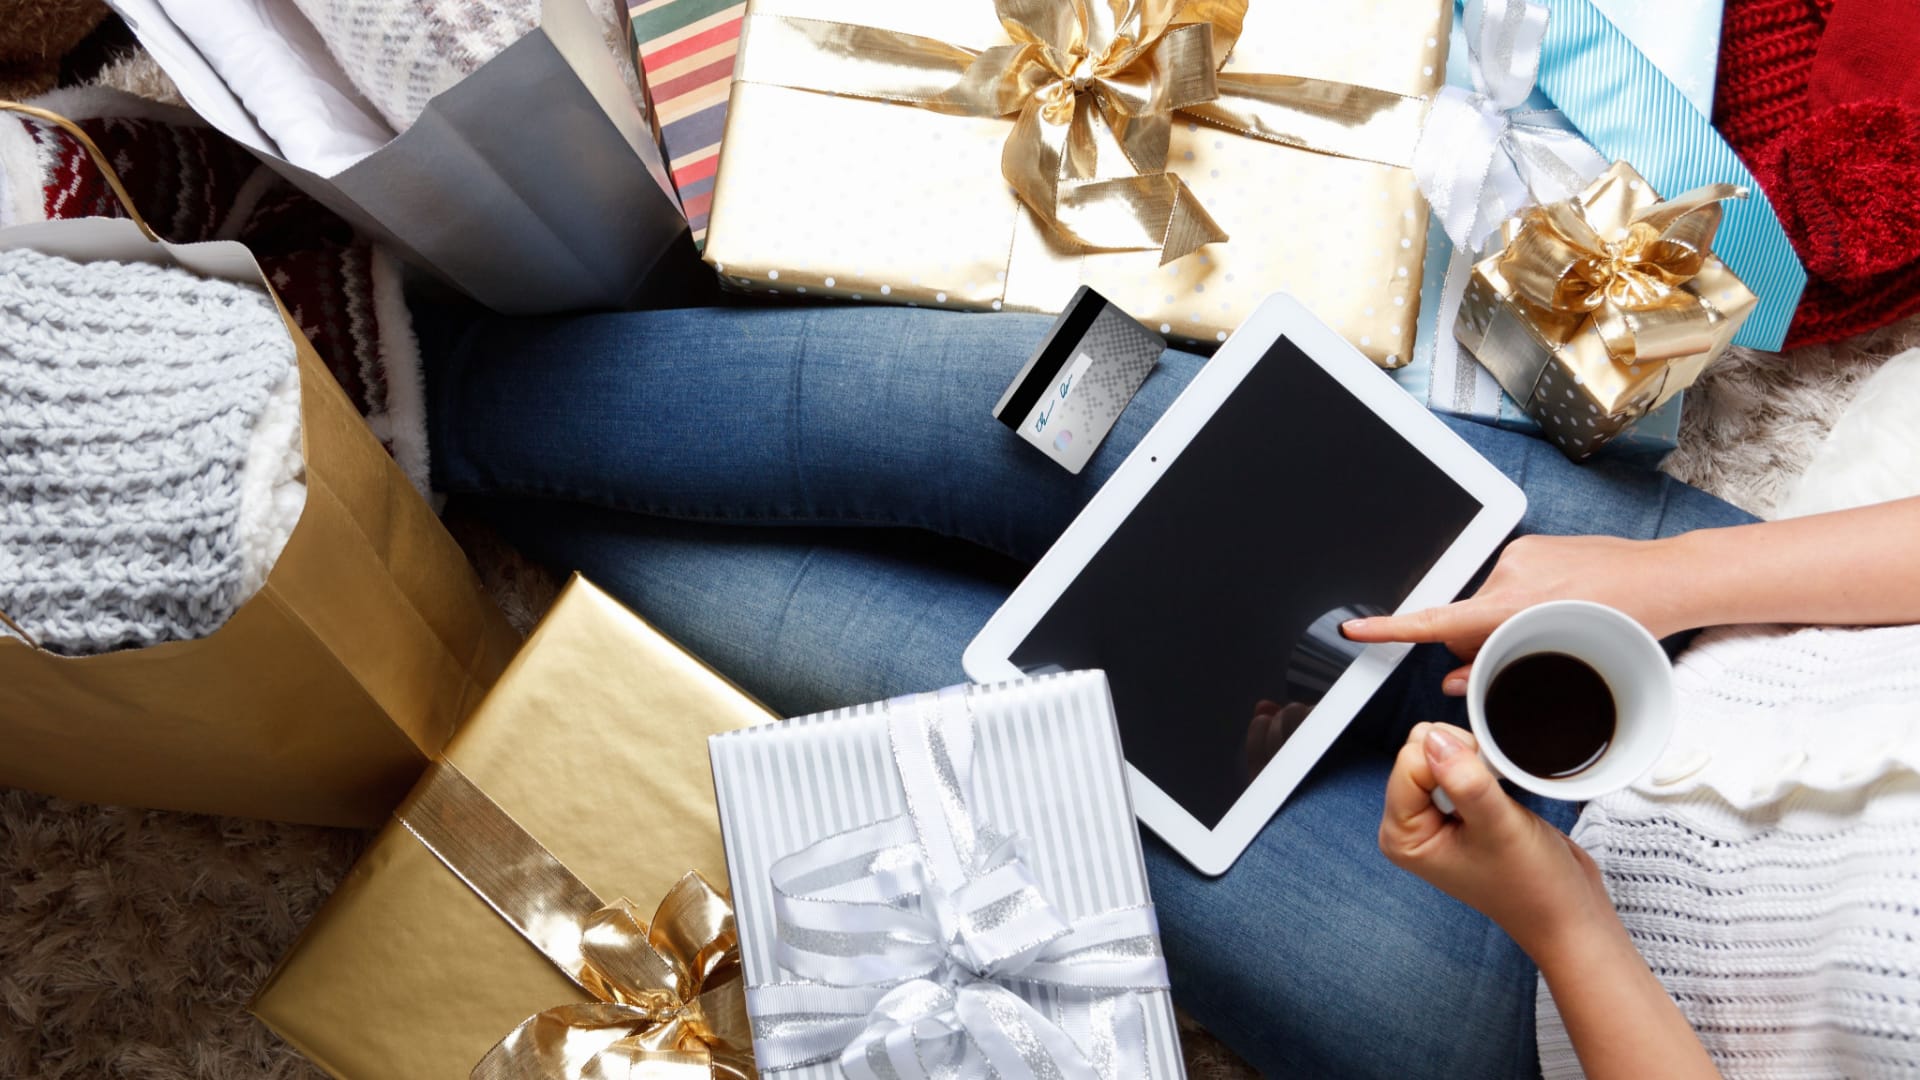 Consumers look to use AI for holiday shopping